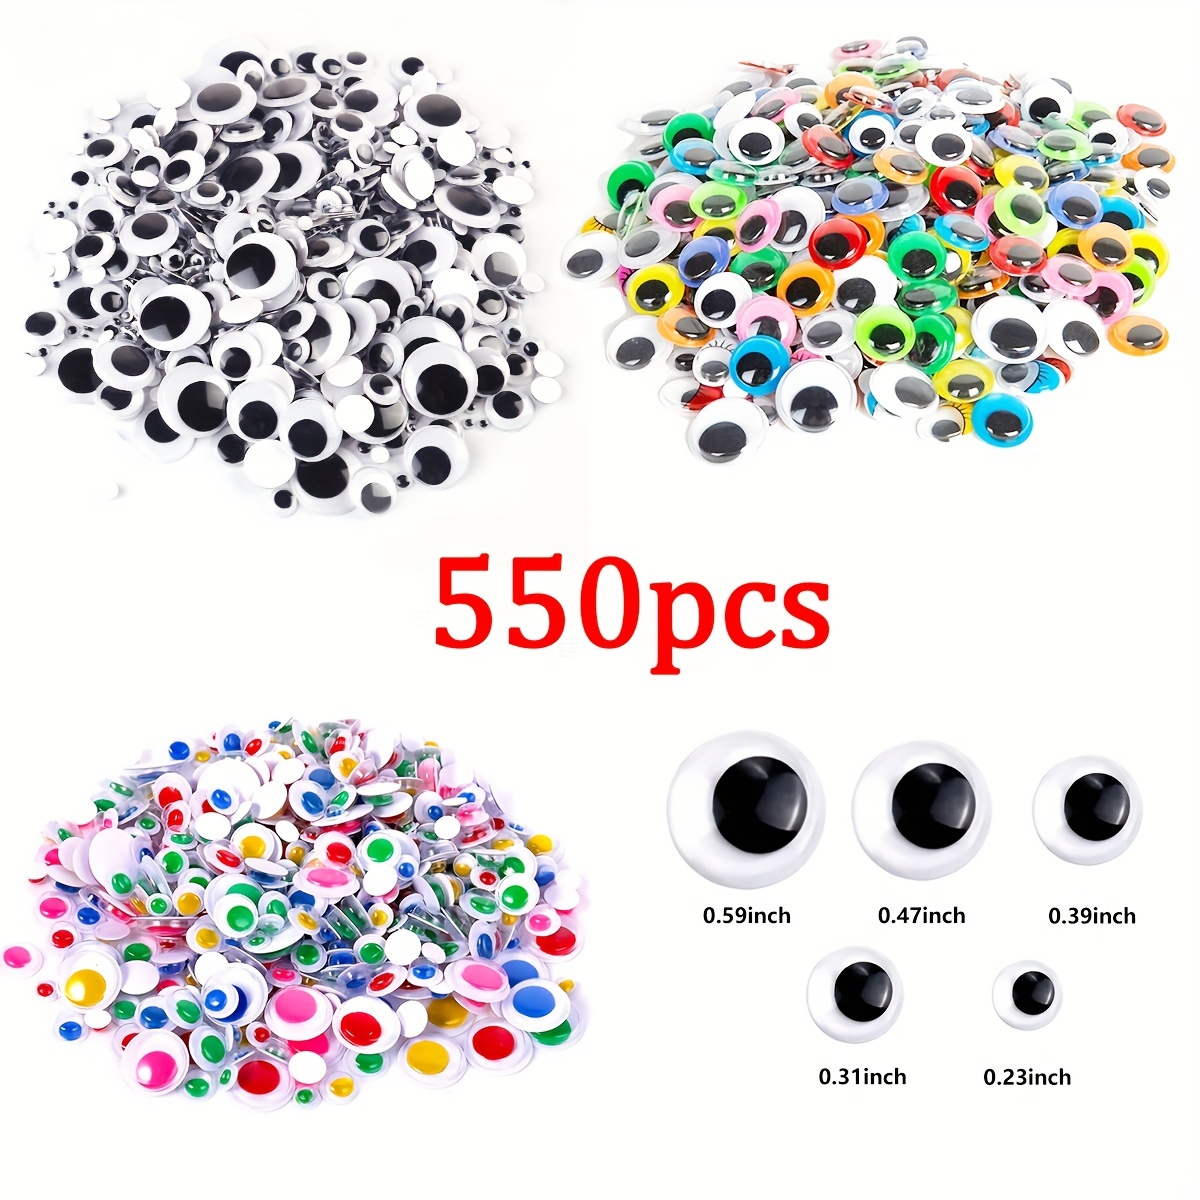  2/3/4 Inch Mixed Googly Wiggle Eyes Self Adhesive Back 6 Pack  Large Black Giant Wiggle Googly Eyes Stickers for DIY Scrapbooking Crafts  Decorations, Toy Accessories (2 3 4 Inch) : Arts, Crafts & Sewing